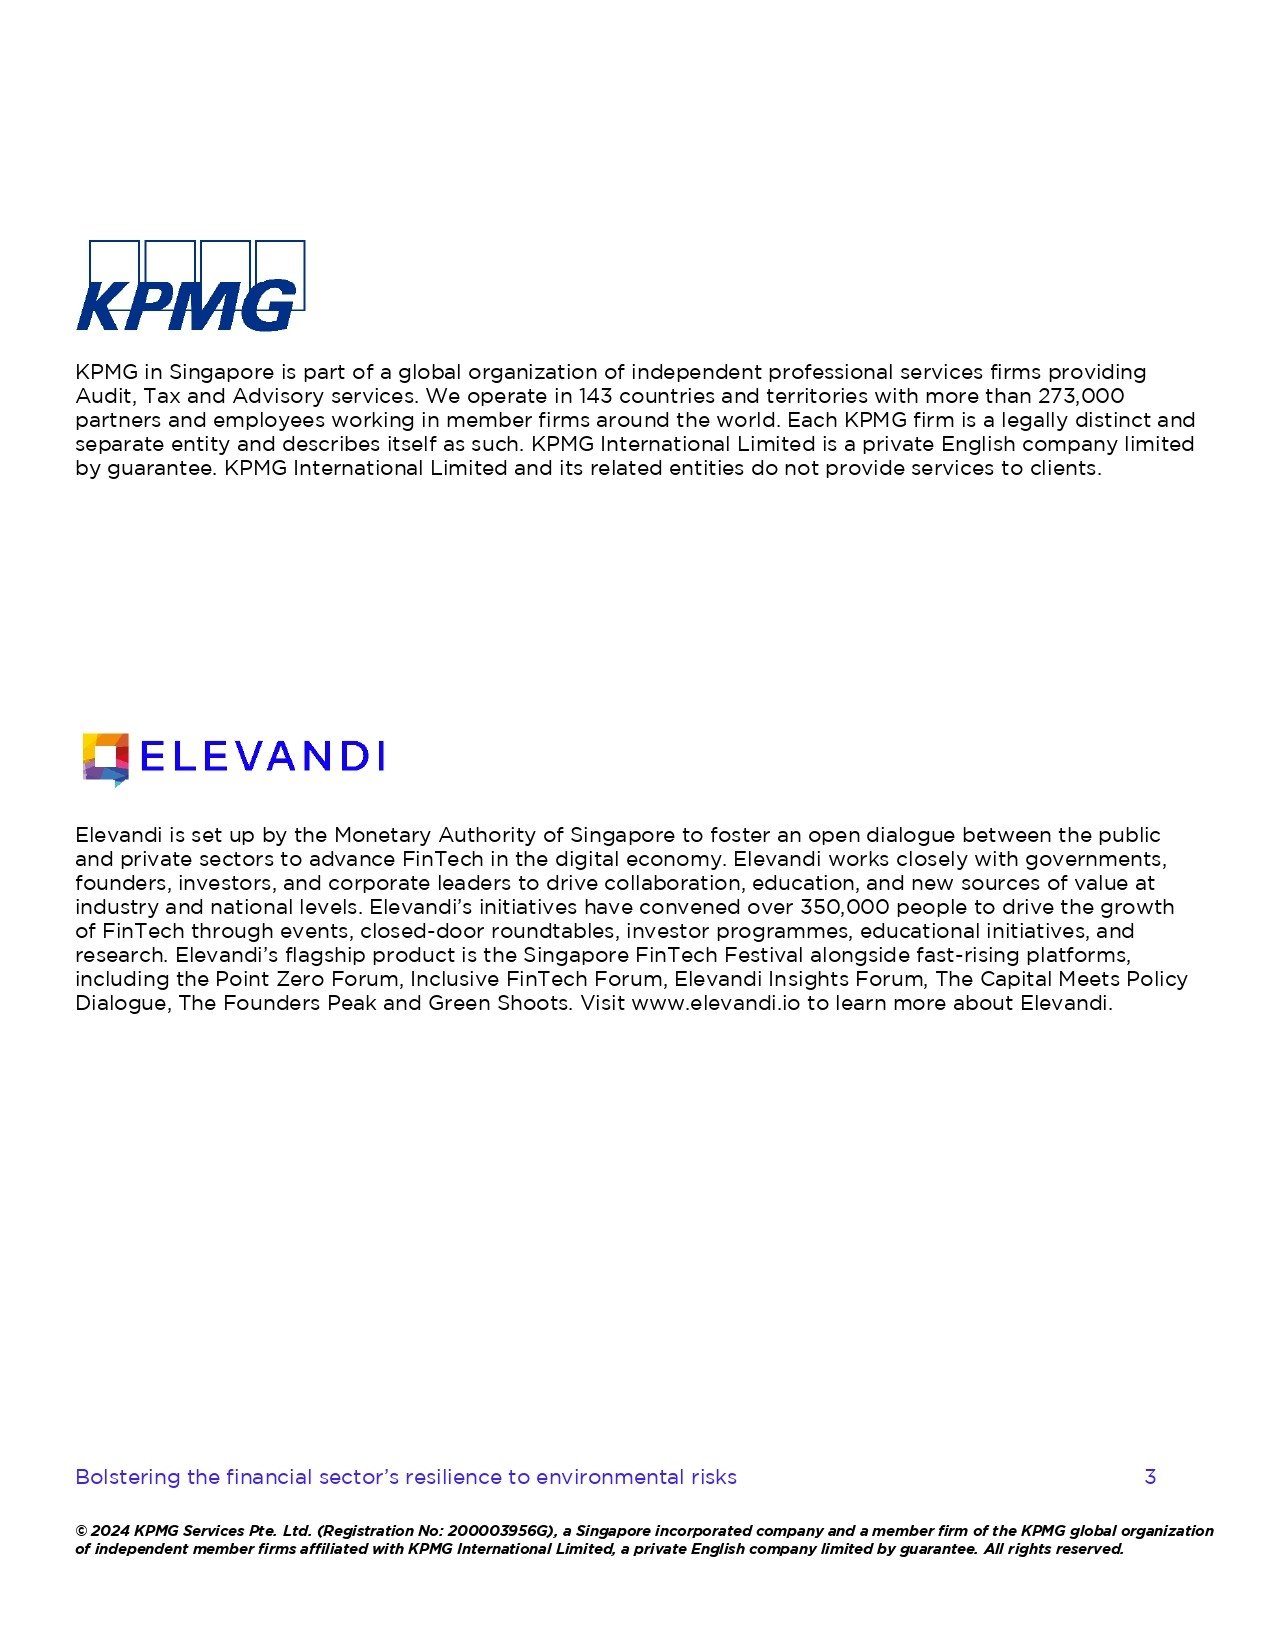 KPMGxElevandi-Bolstering-the-Financial-Sector-Resilience-to-Environmental-Risks-3